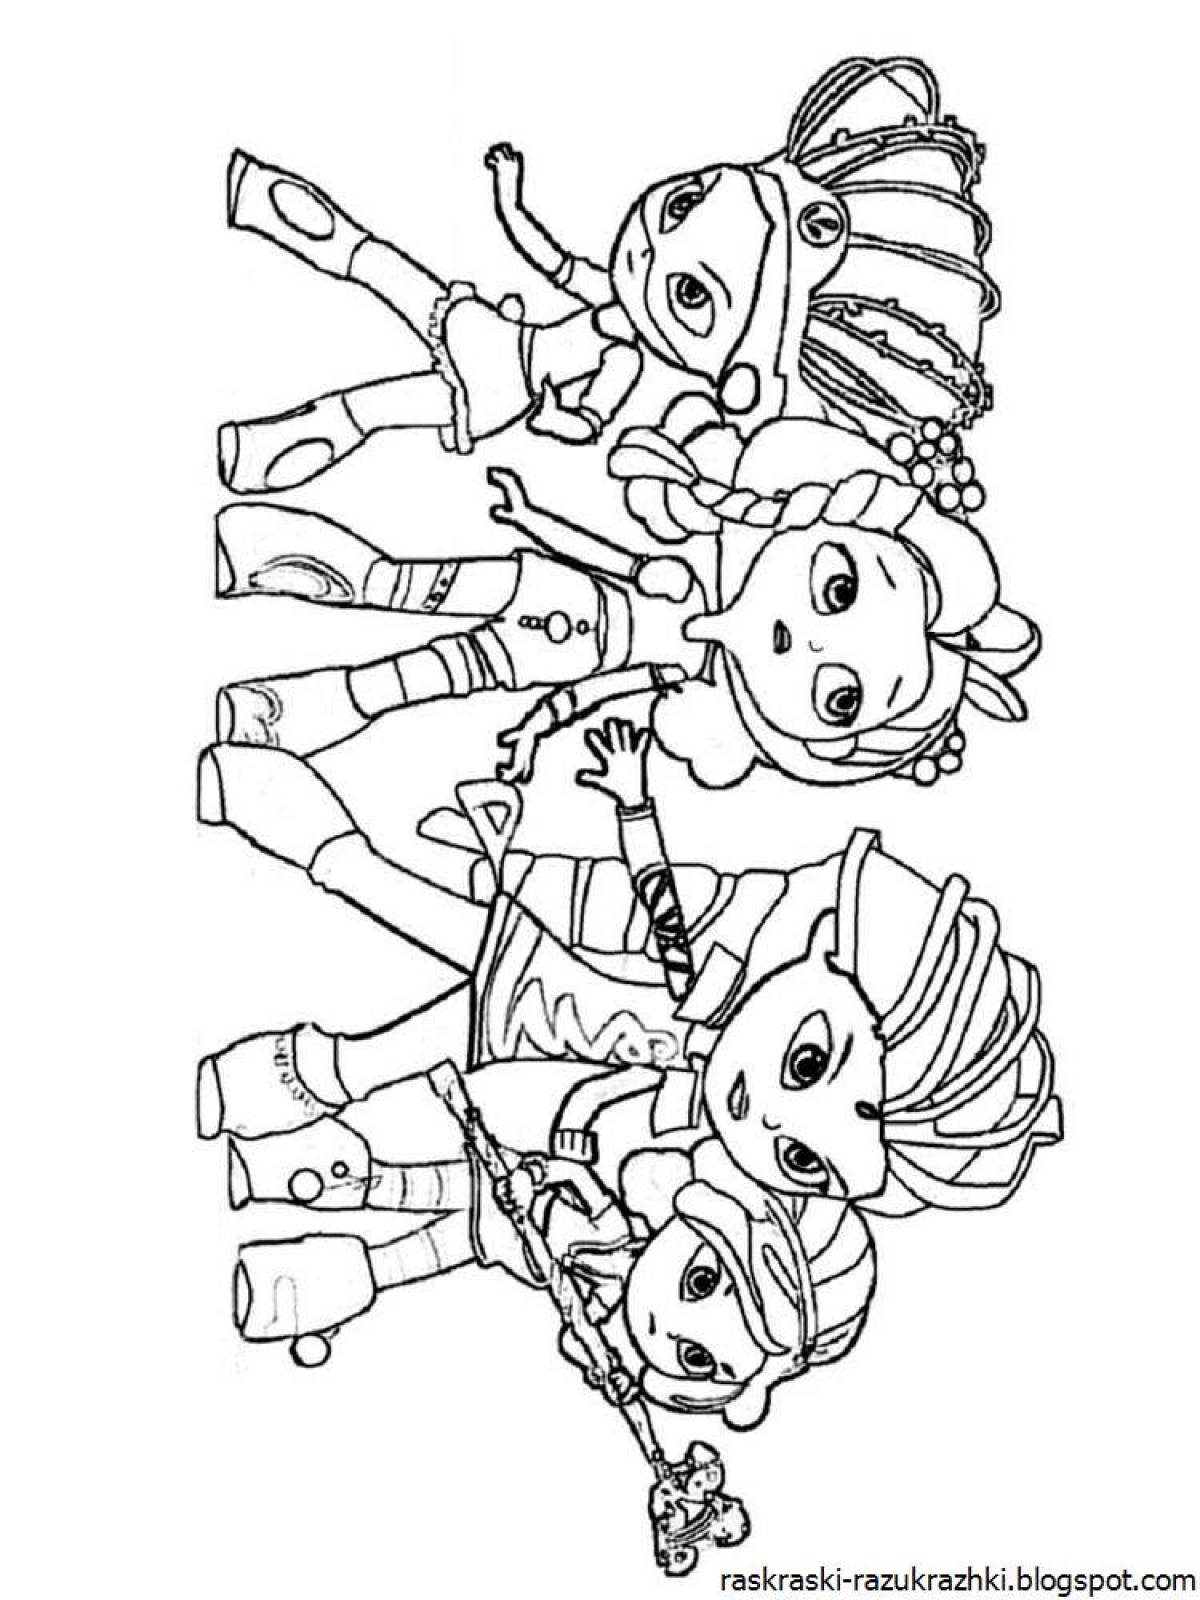 Gorgeous snowball coloring page